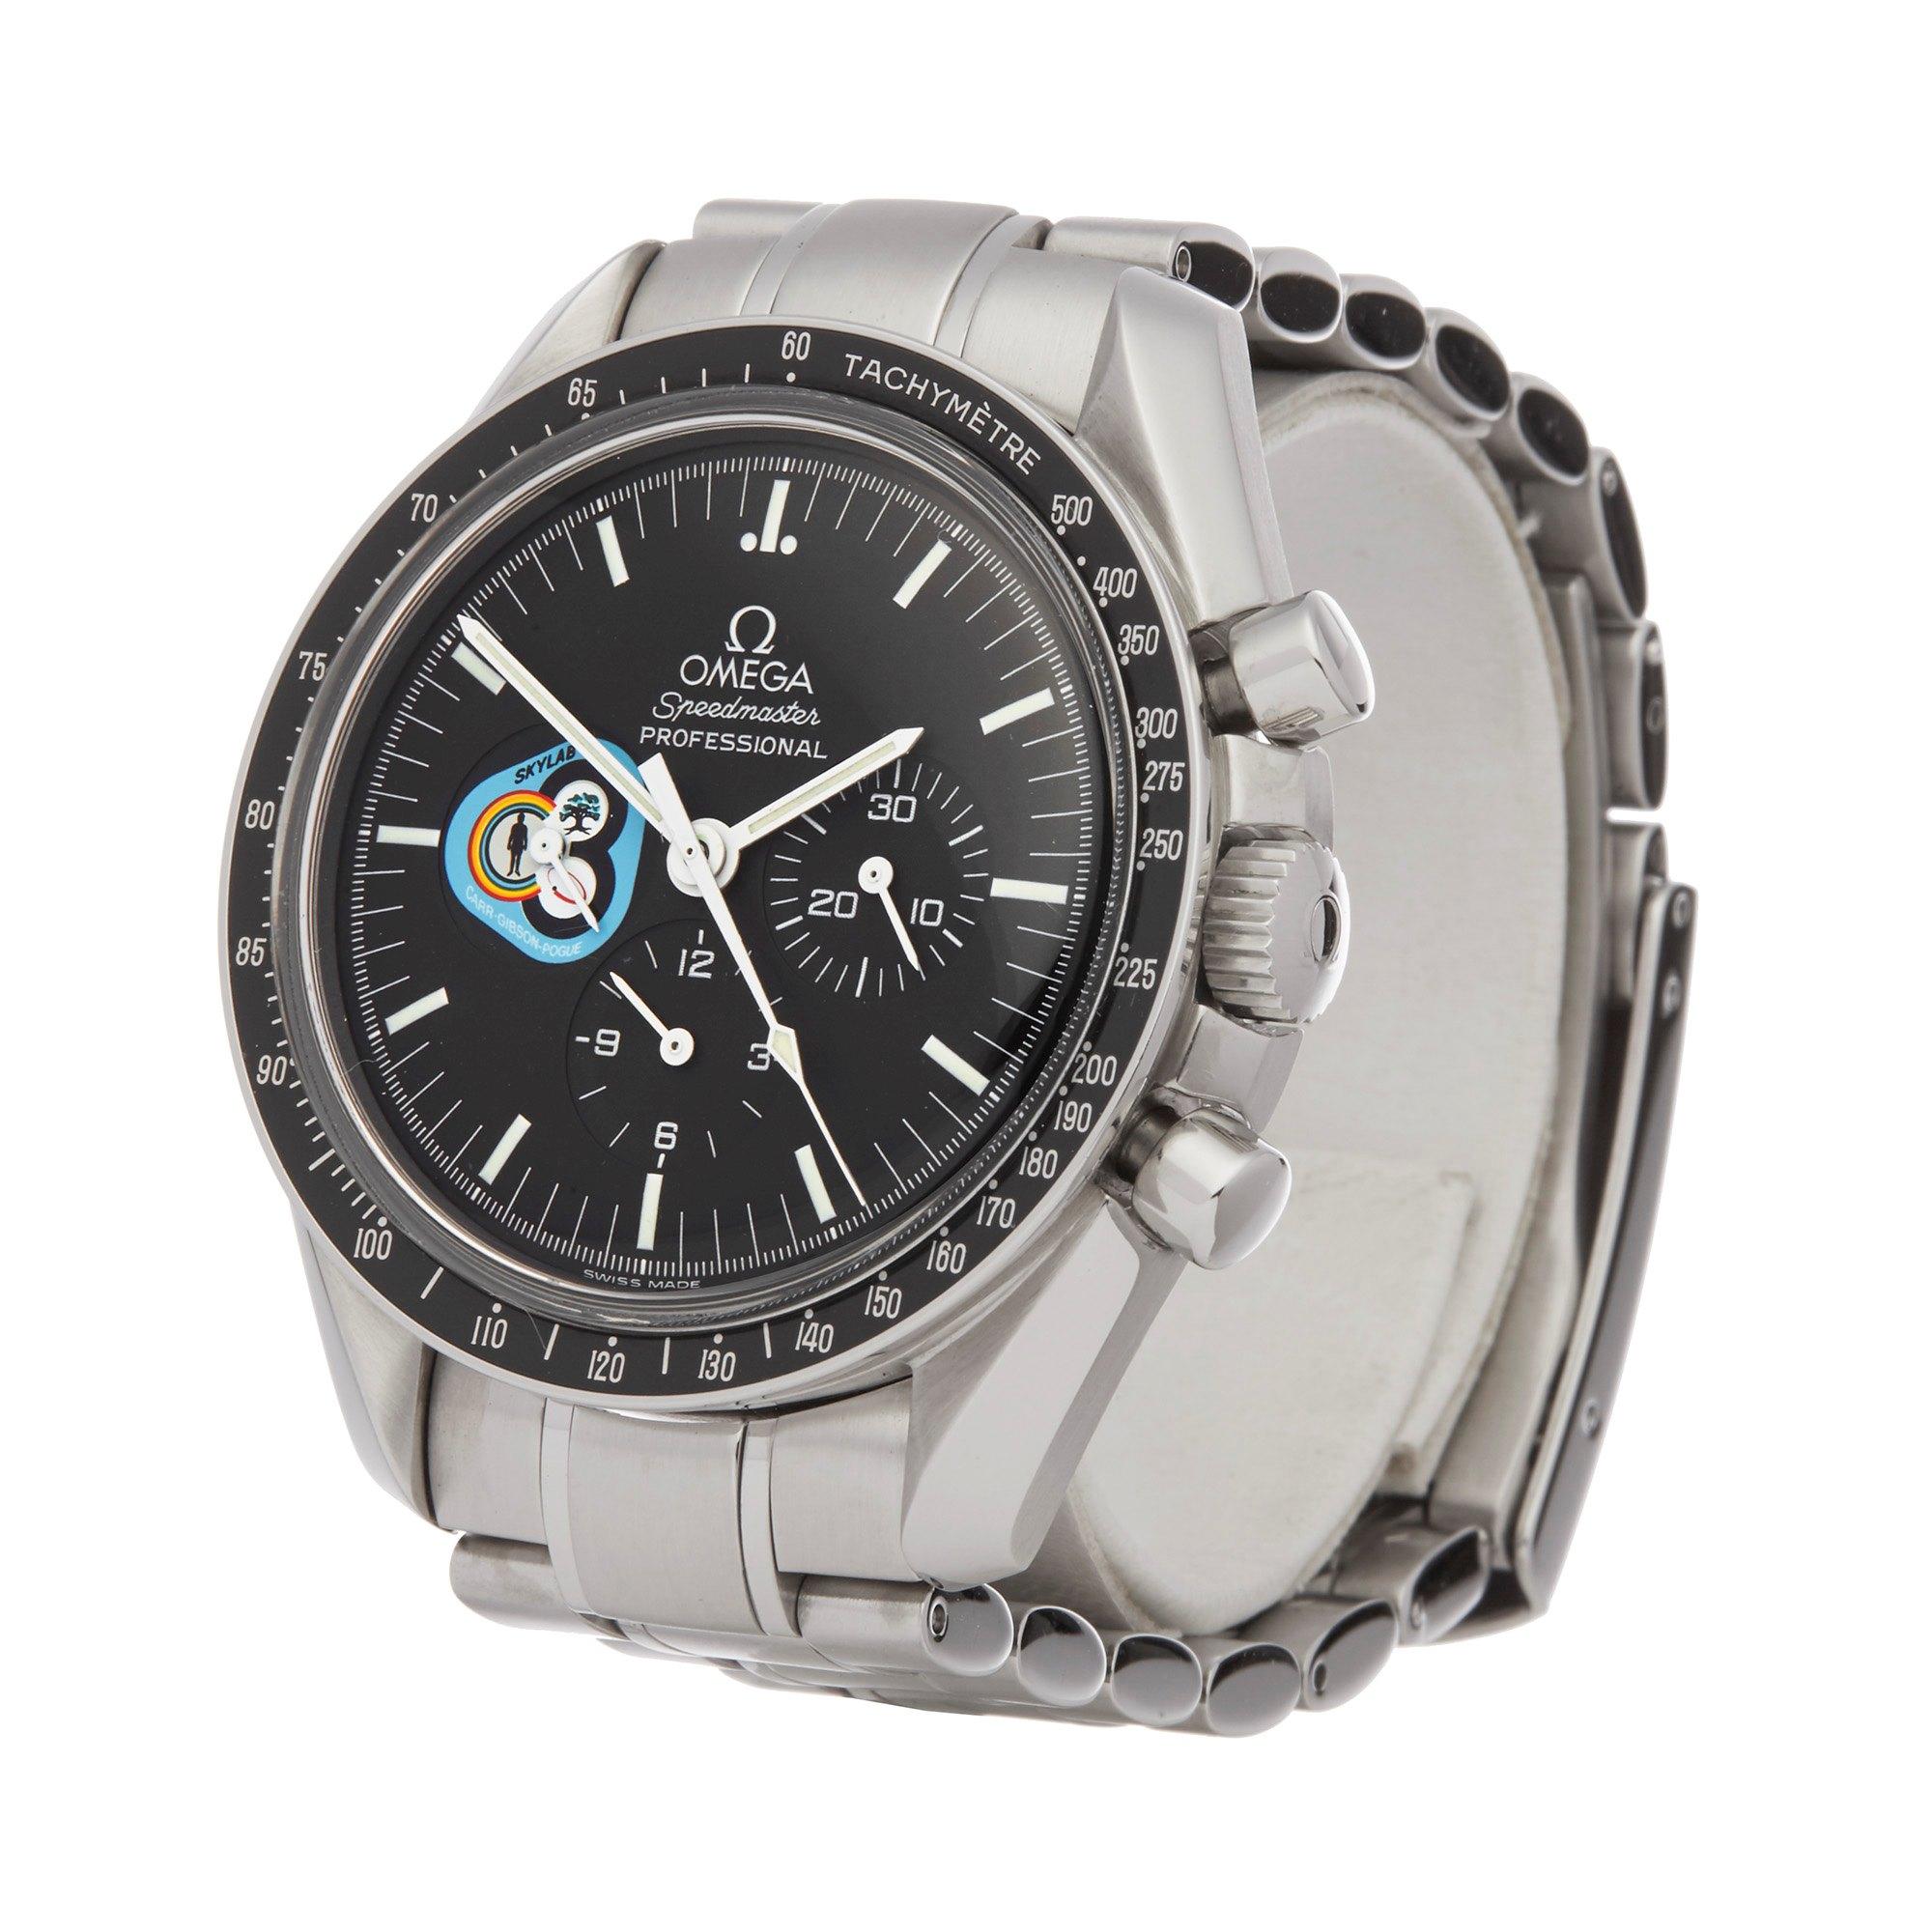 Xupes Reference: COM002546
Manufacturer: Omega
Model: Speedmaster
Model Variant: Missions
Model Number: 345.0022 3597.23.00
Age: 26-08-1998
Gender: Men
Complete With: Omega Box, Manuals & Extract from Archive
Dial: Black Baton
Glass: Plexiglass
Case